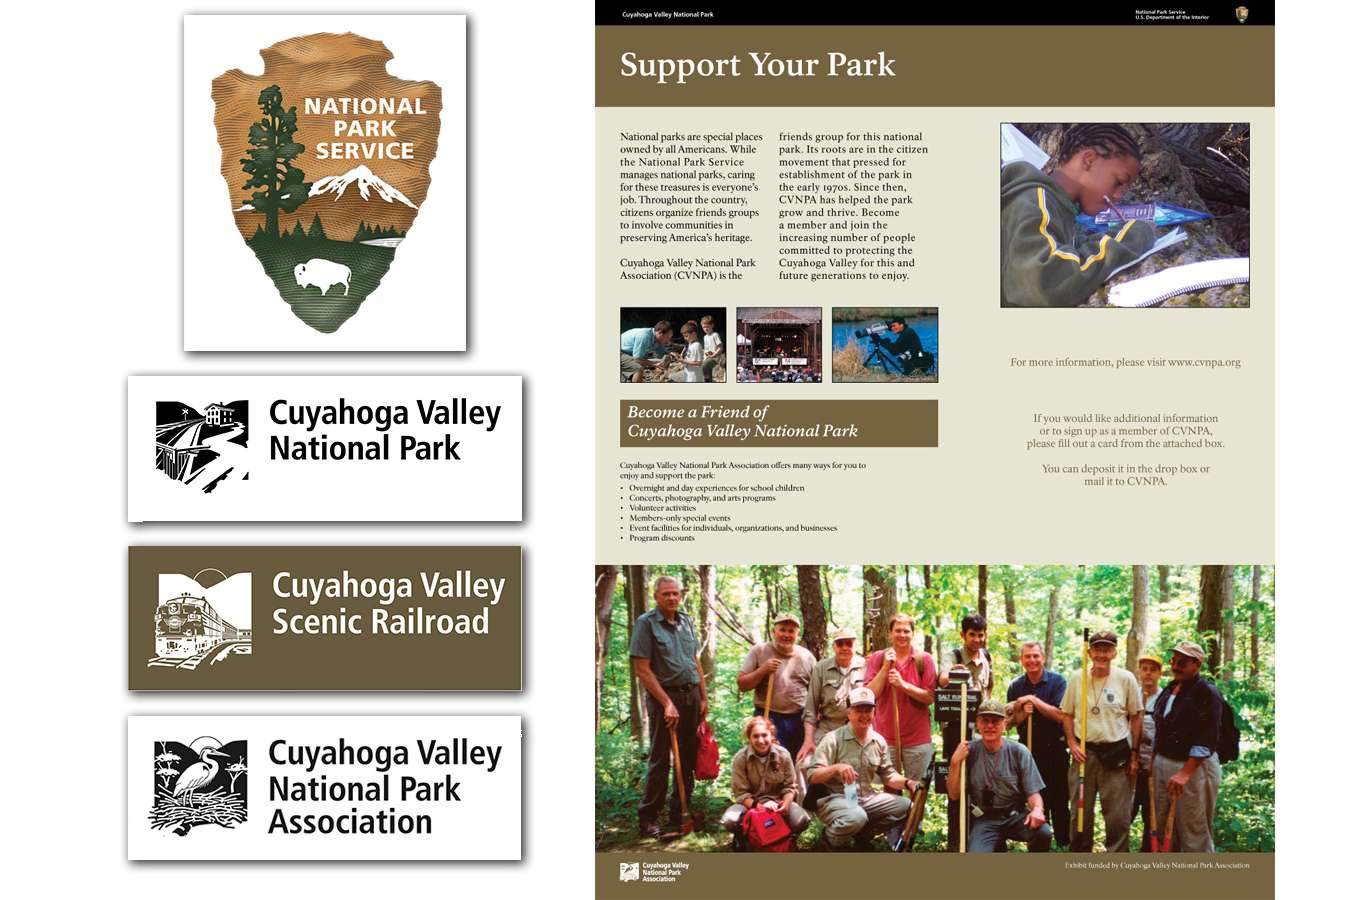 CUVANPS8 : Logos developed for the Cuyahoga Valley National Park, Association and Scenic Railroad 